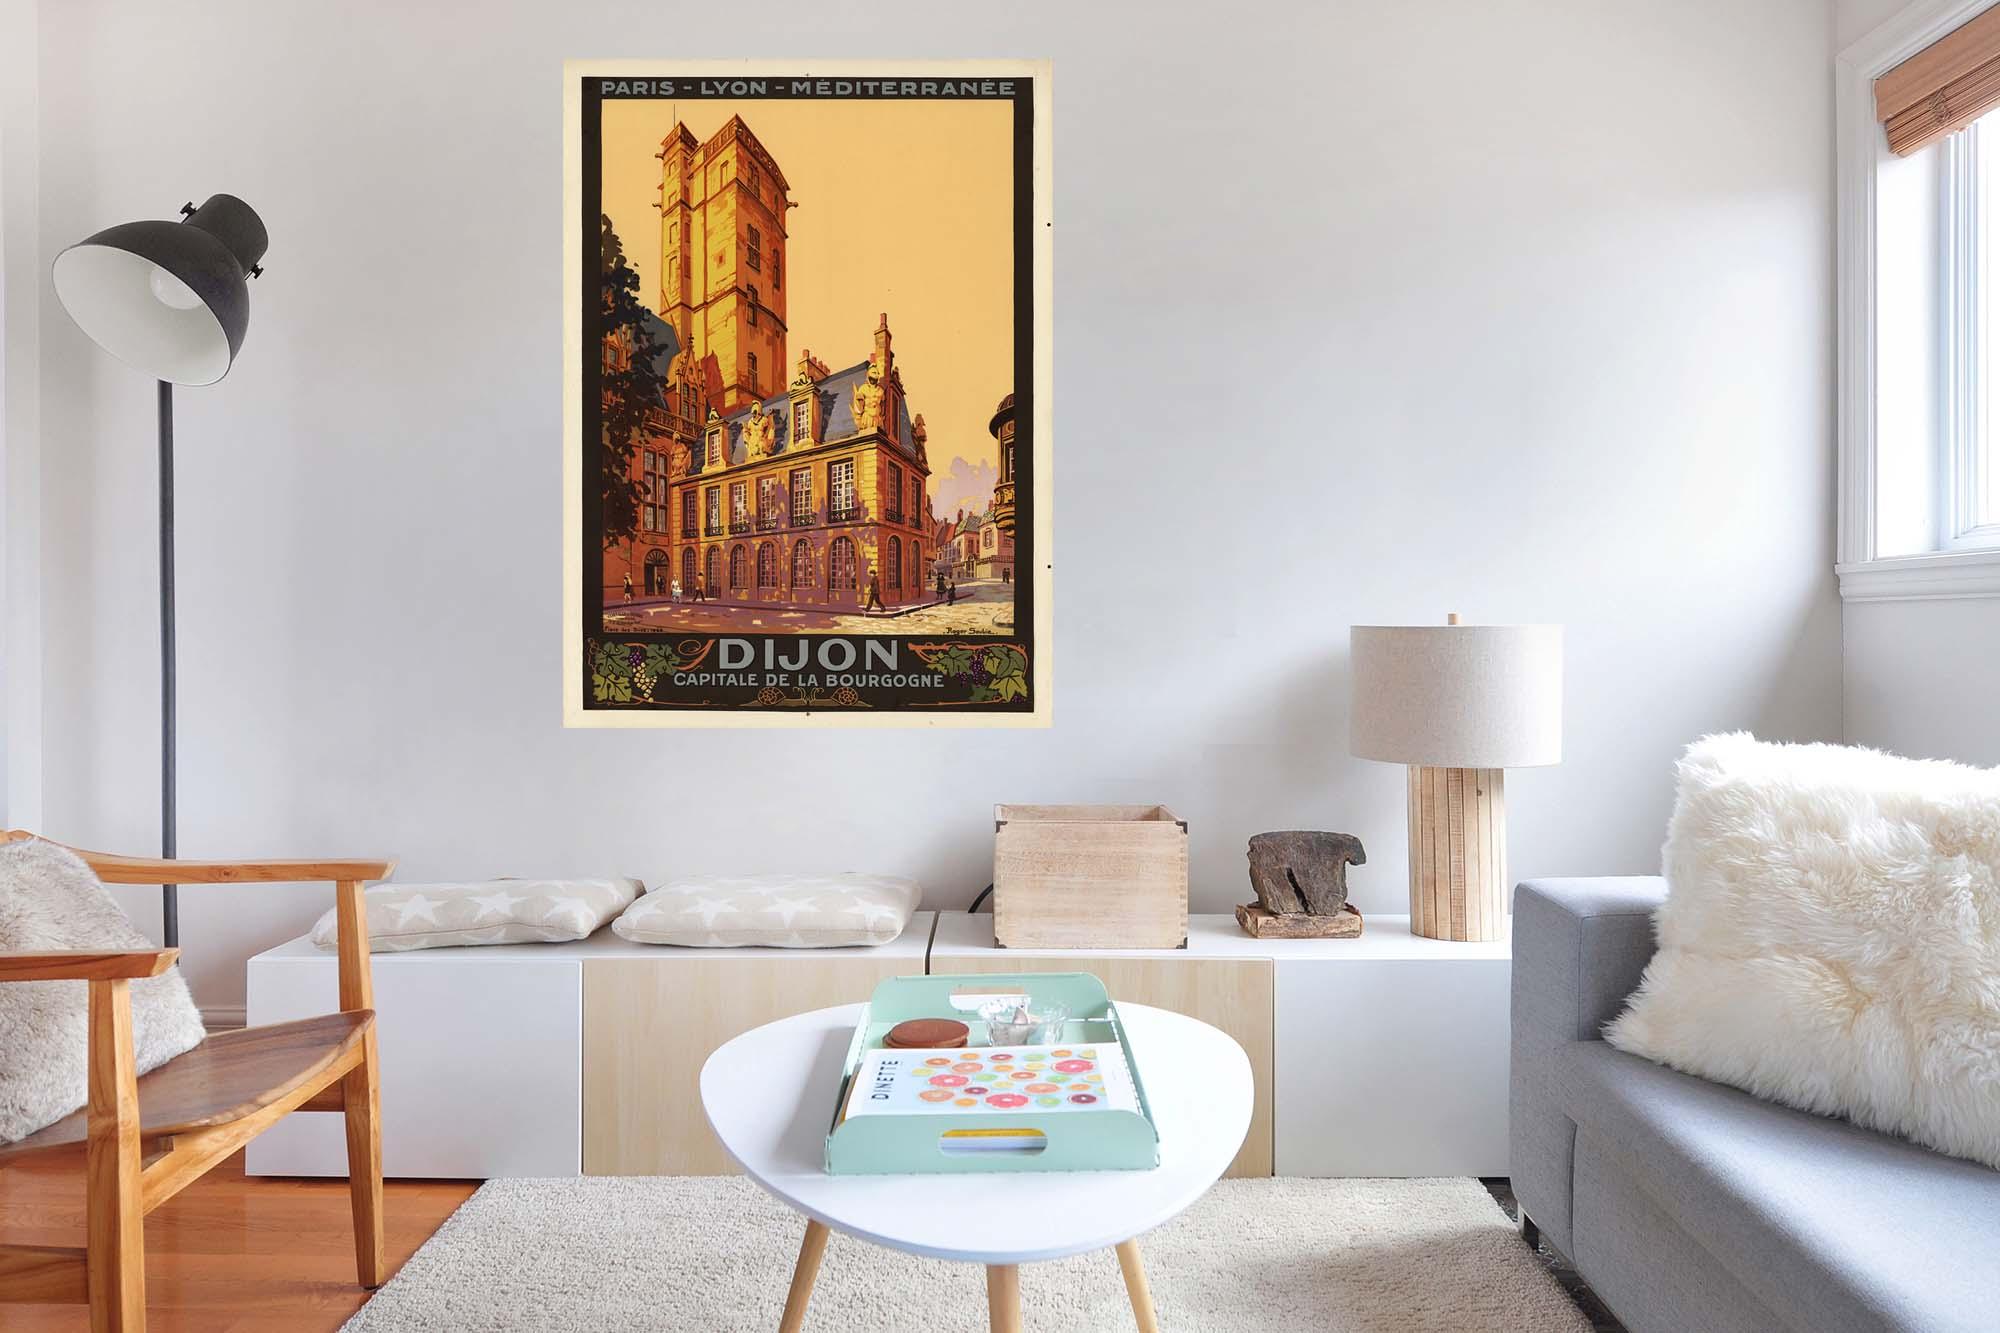 CoolWalls.ca diecut Vintage French Railways Dijon Tourism Poster, Wall Decal Sticker Wallpaper, PEEL-N-STICK, removable anytime. Great for a classroom